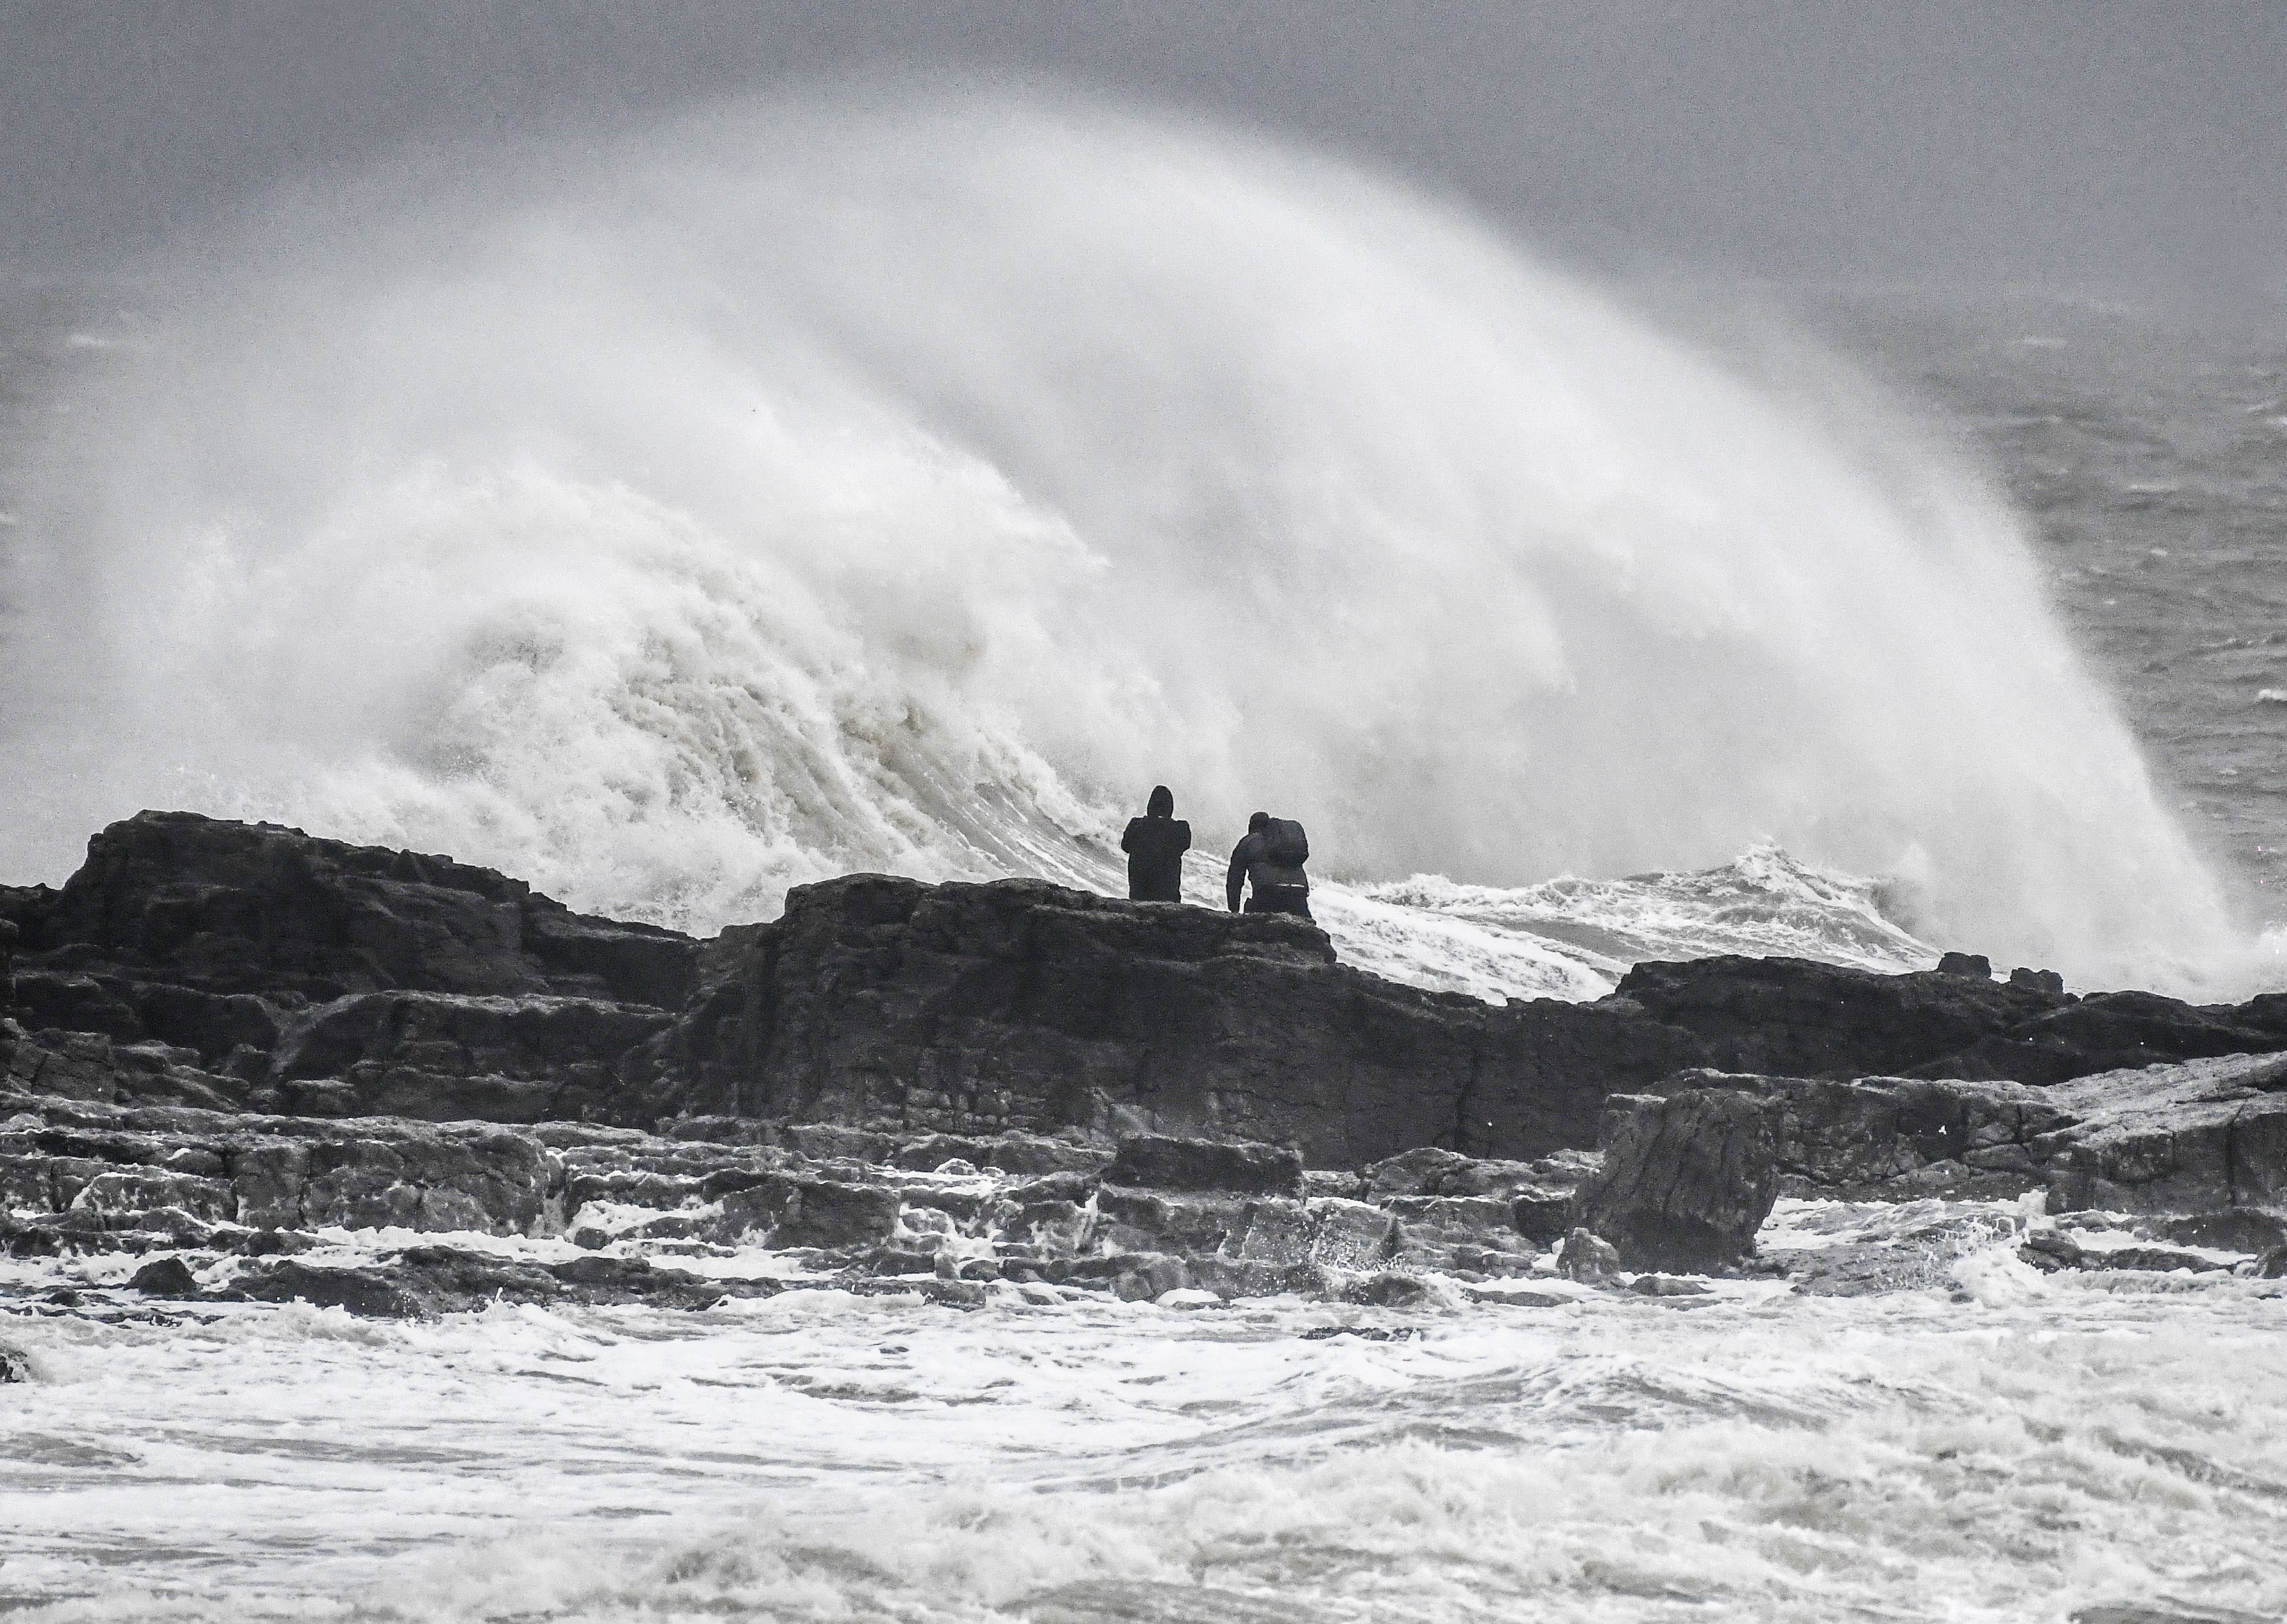 Robert Melen on Twitter: "People stand on the rocks at Porthcawl seafront  to get a better picture of the waves crashing against the lighthouse as  Storm Bella hits the UK. #weather #stormbella #